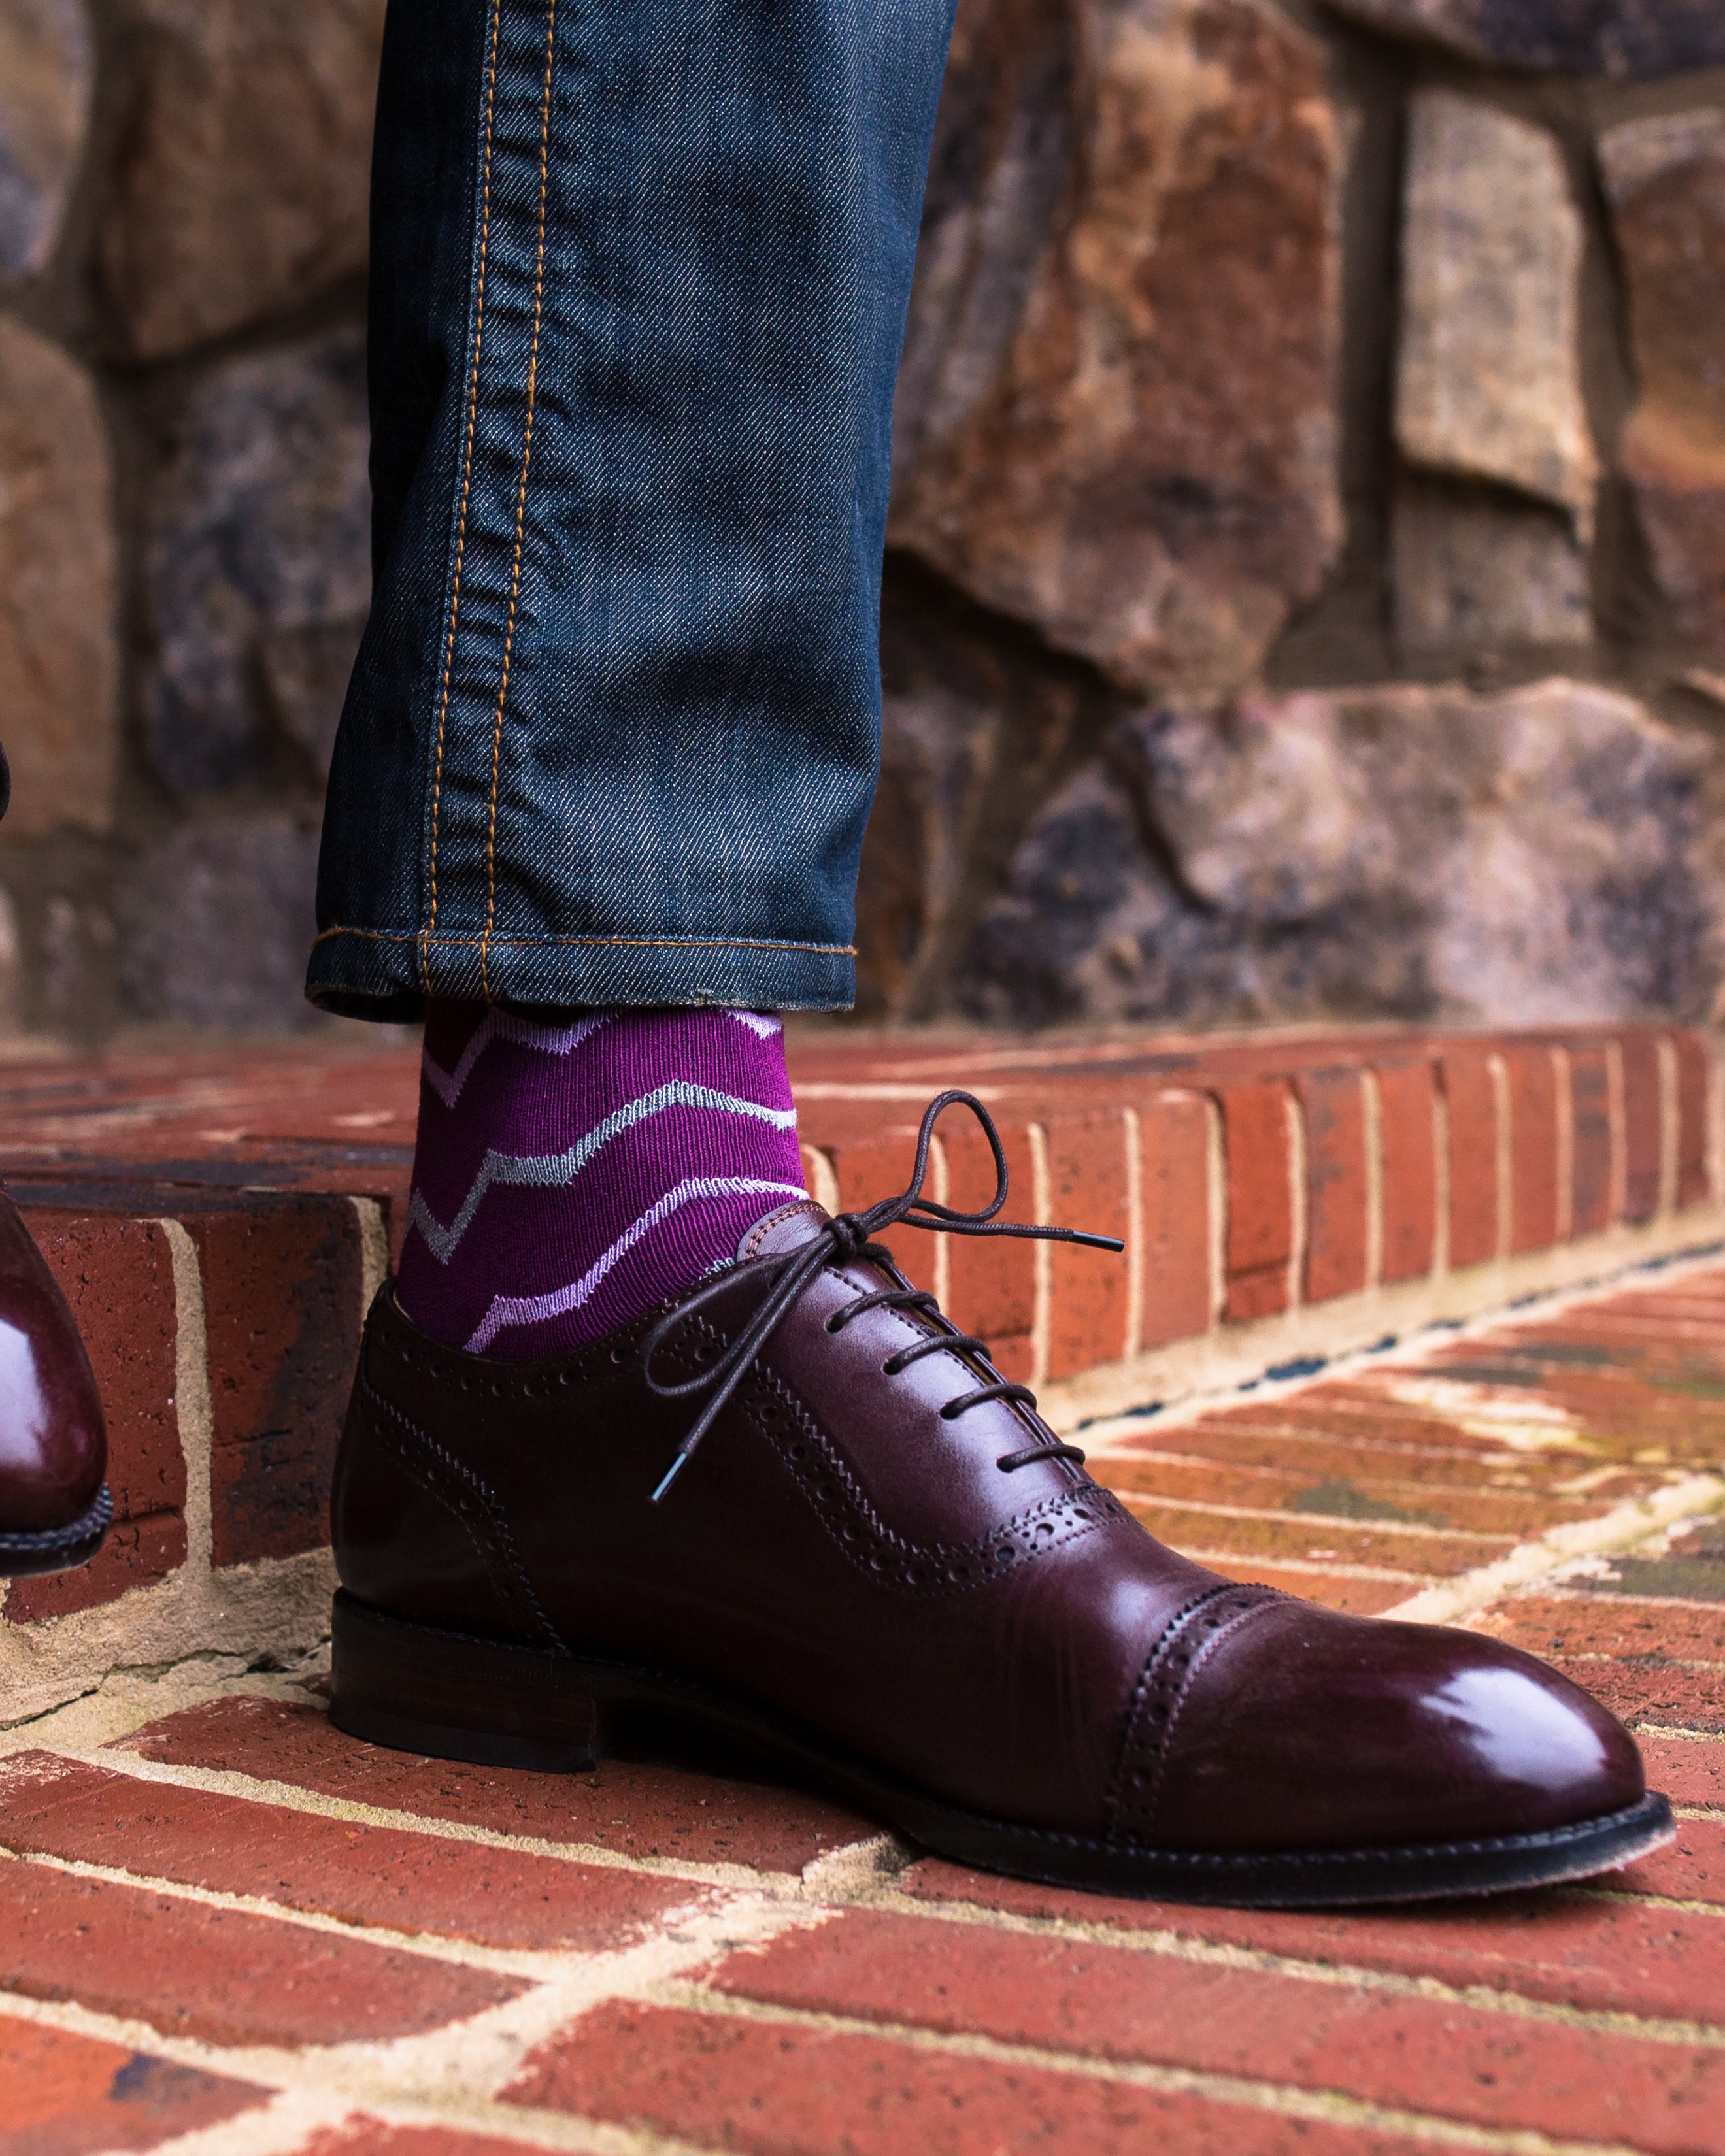 purple over the calf dress socks with light blue stripes, dark brown dress shoes, blue jeans